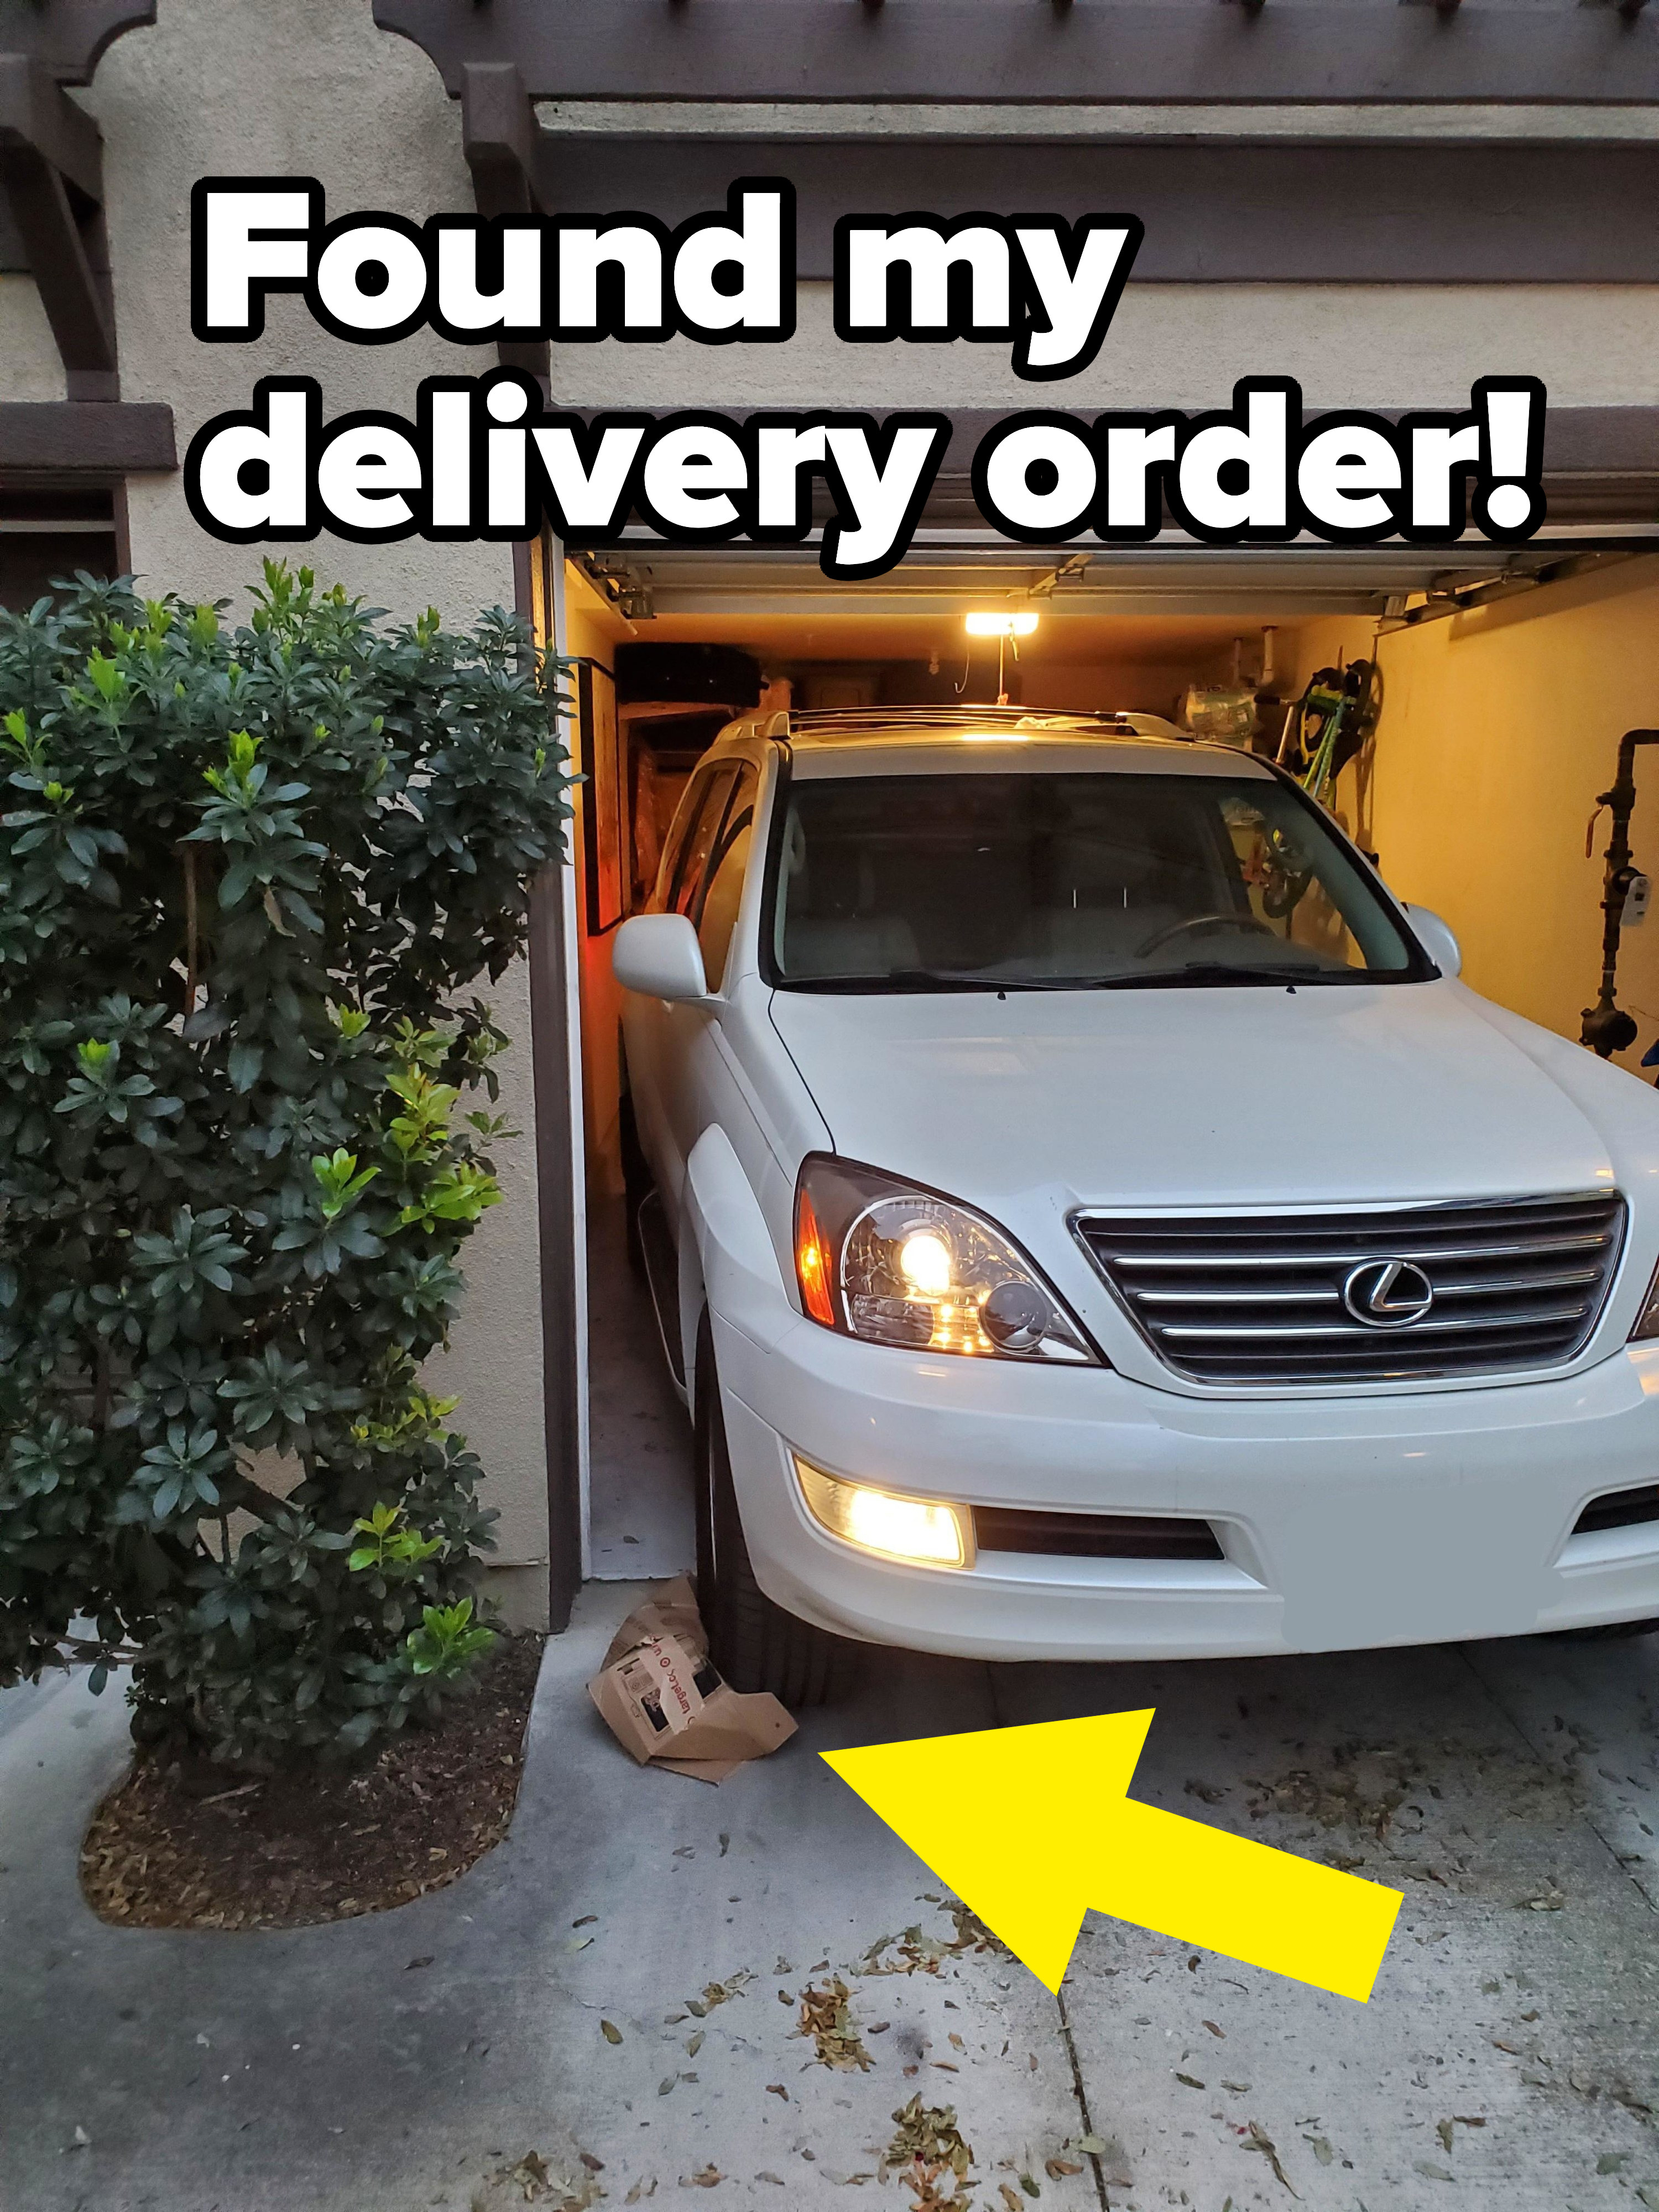 A delivery package under a car tire